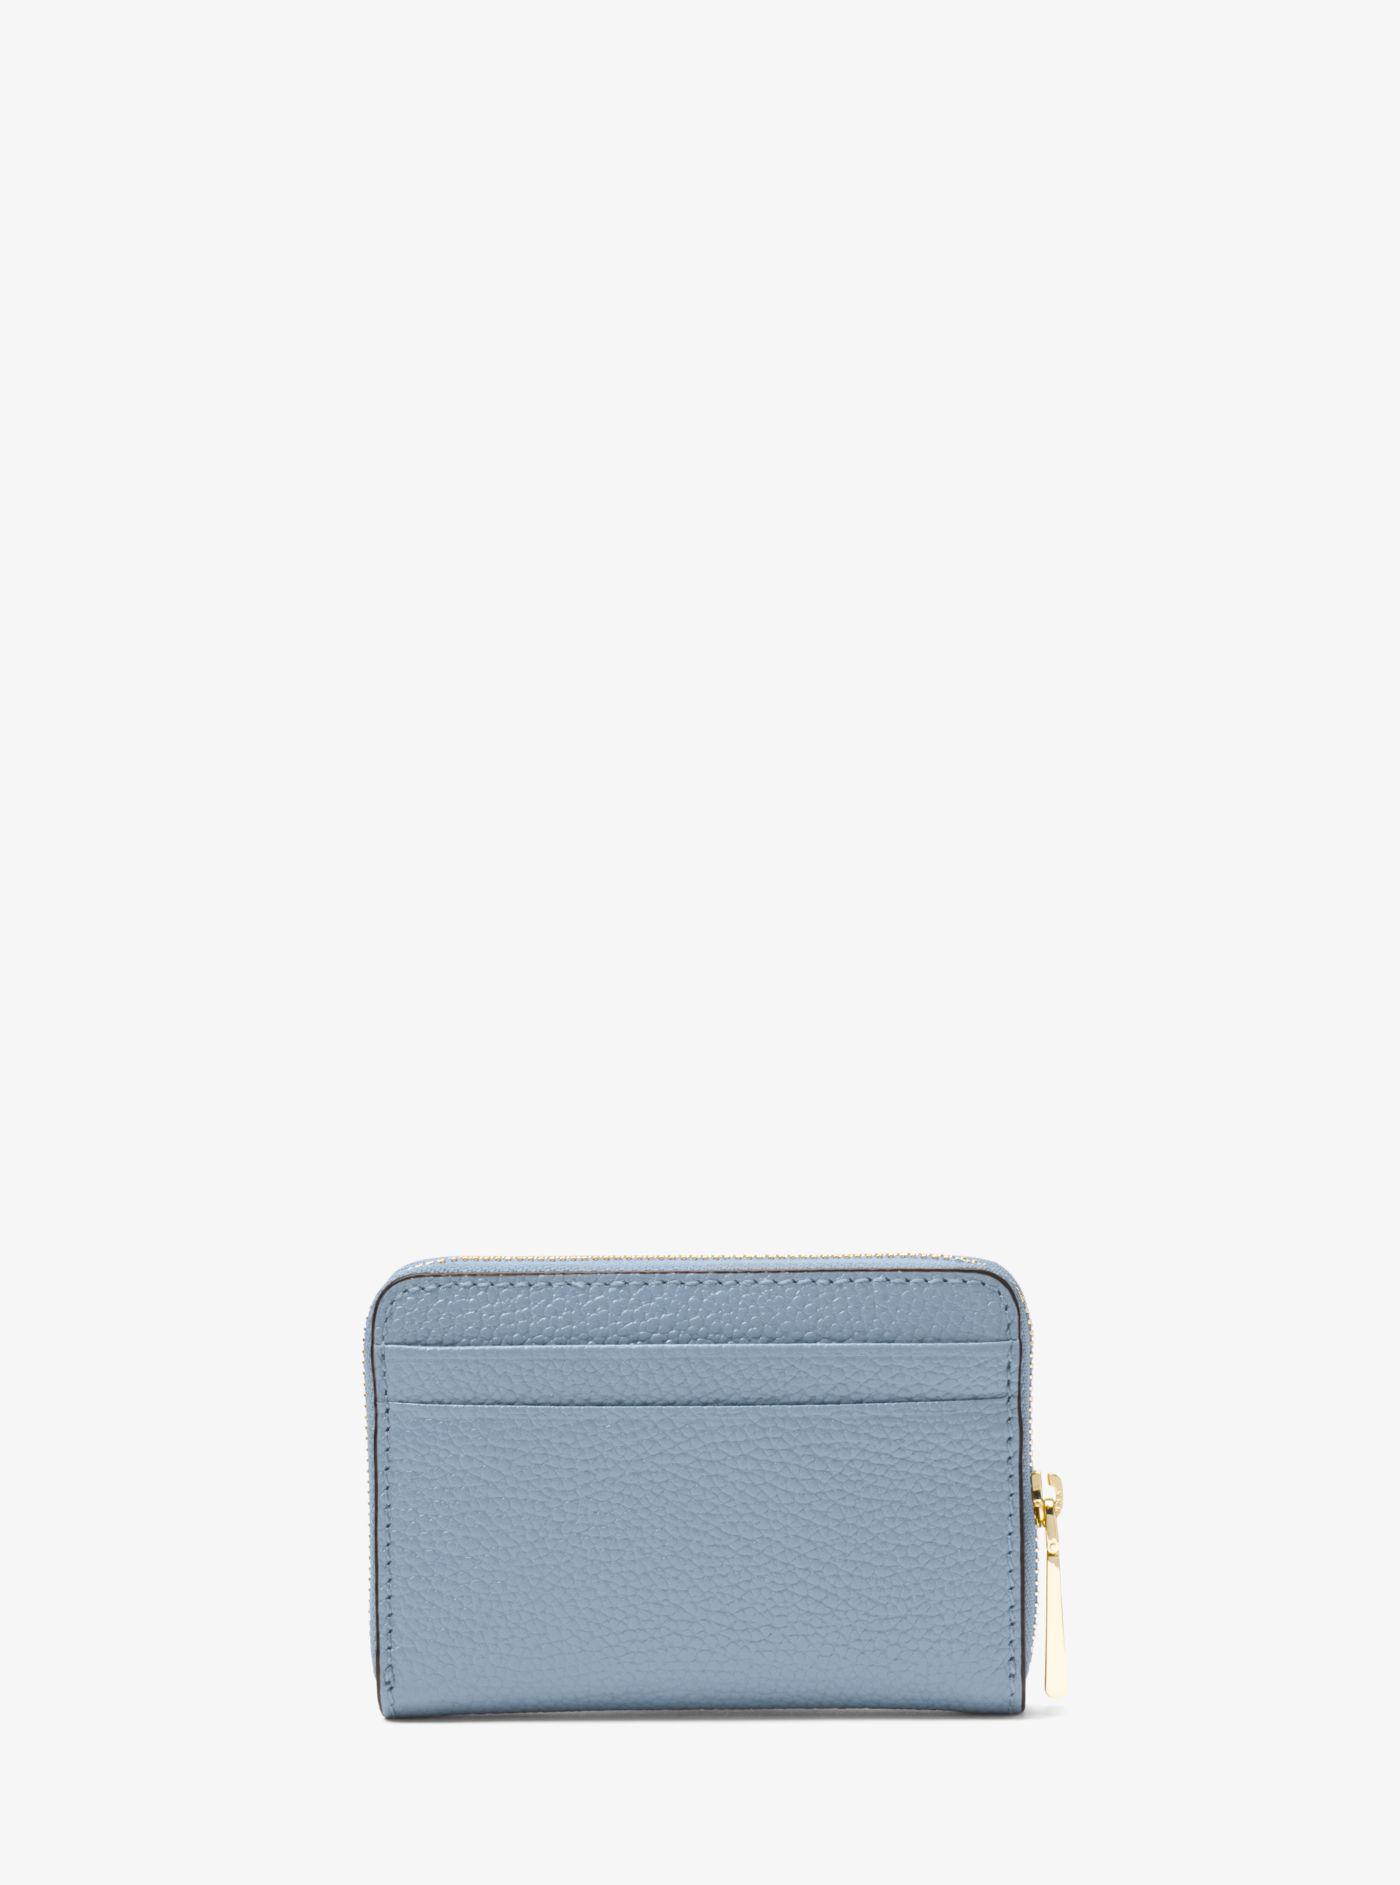 Michael Kors Small Pebbled Leather Wallet in Blue | Lyst